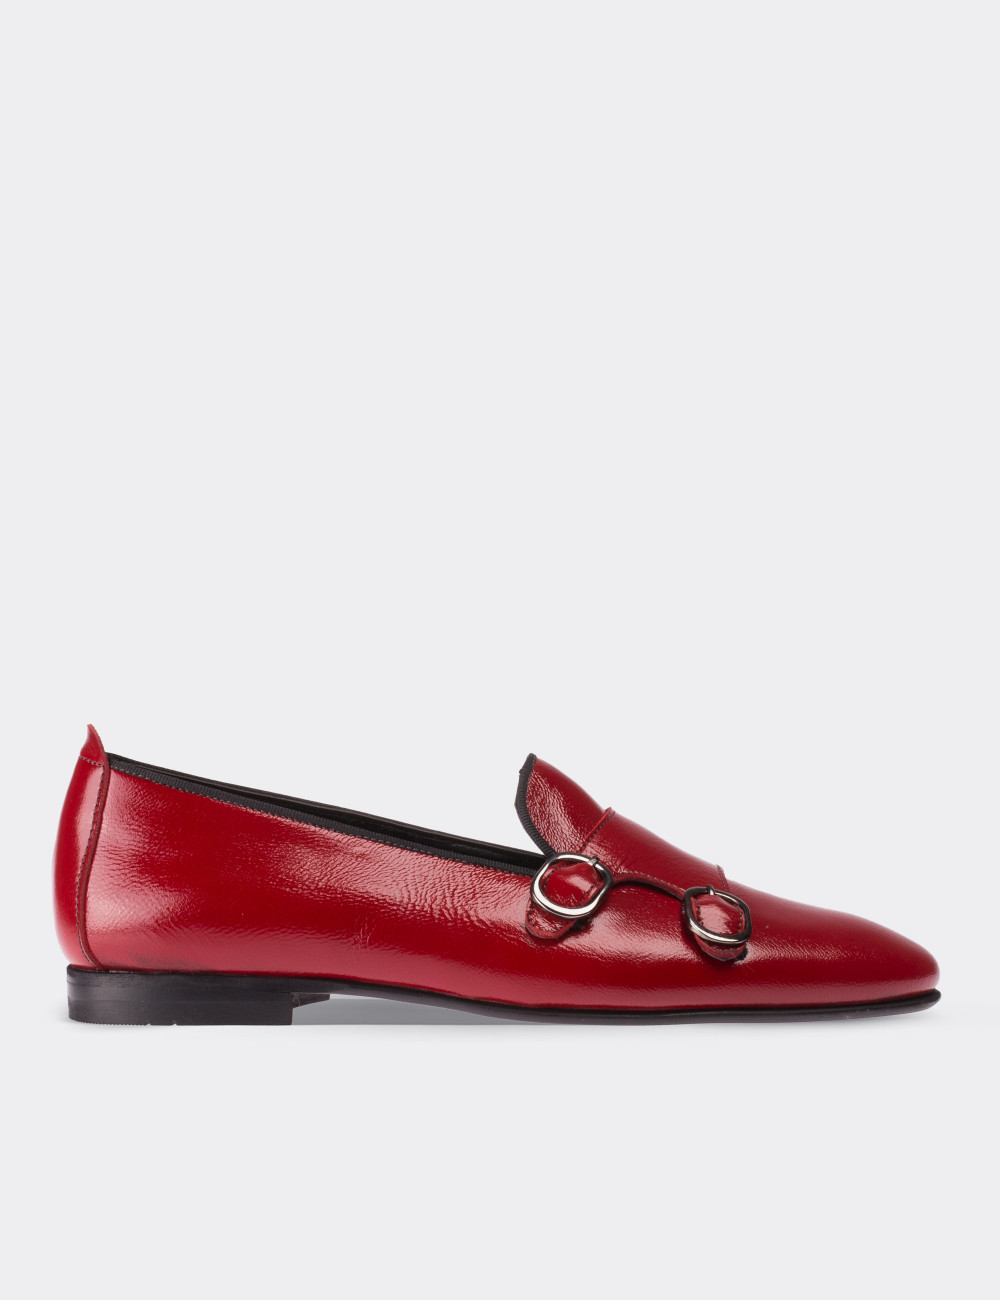 Red Patent Leather Loafers - 01611ZKRMM01